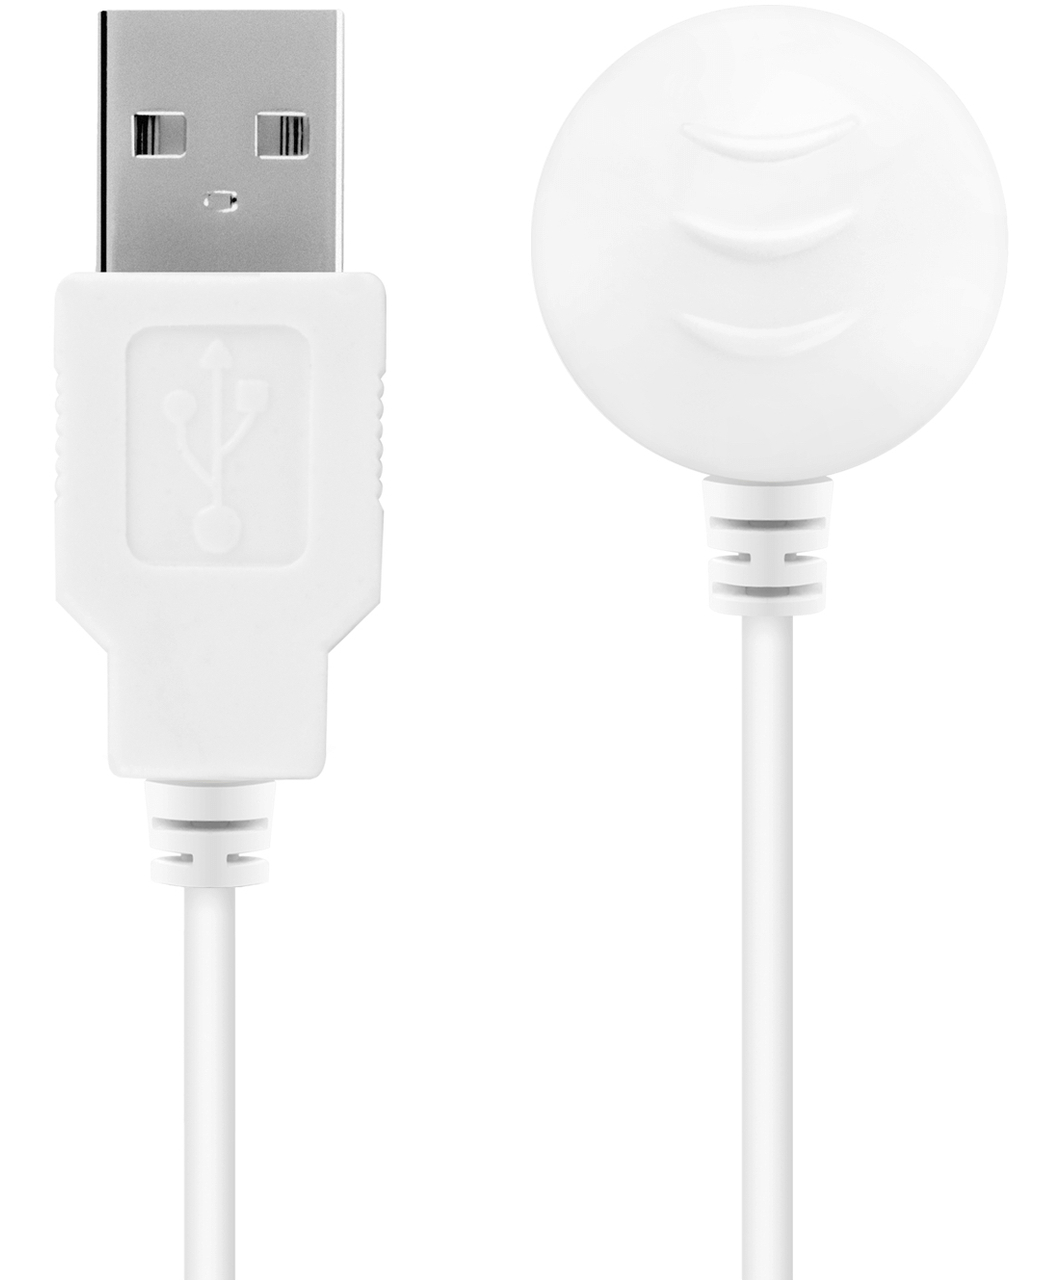 Satisfyer USB Charging Cable